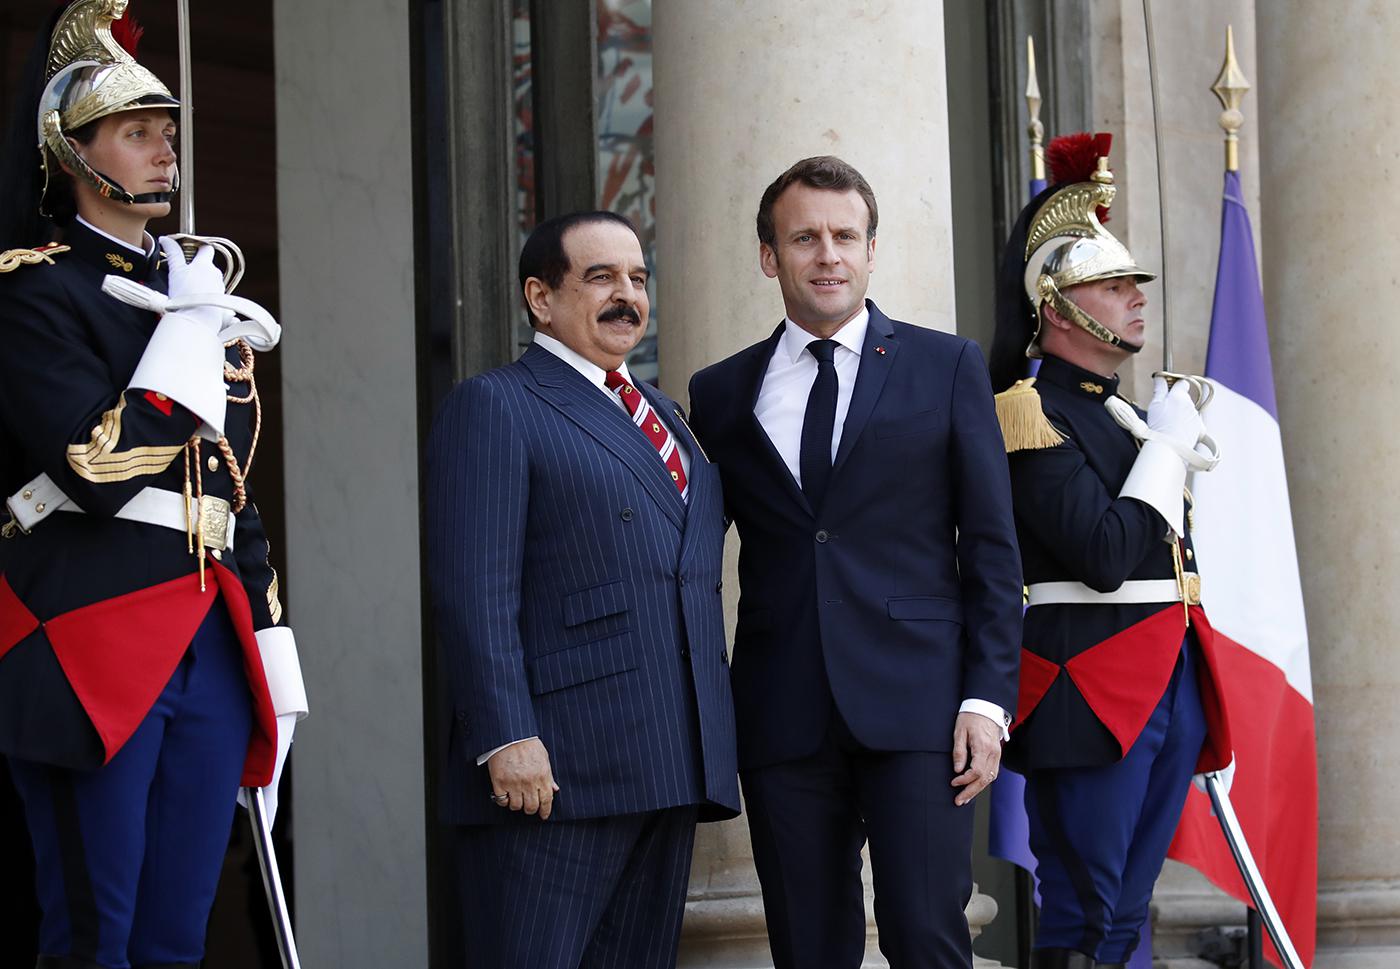 Bahrain's King Hamad bin Isa Al Khalifa, left, is greeted by French President Emmanuel Macron before a meeting at the Elysee Palace in Paris, Tuesday, April 30, 2019.